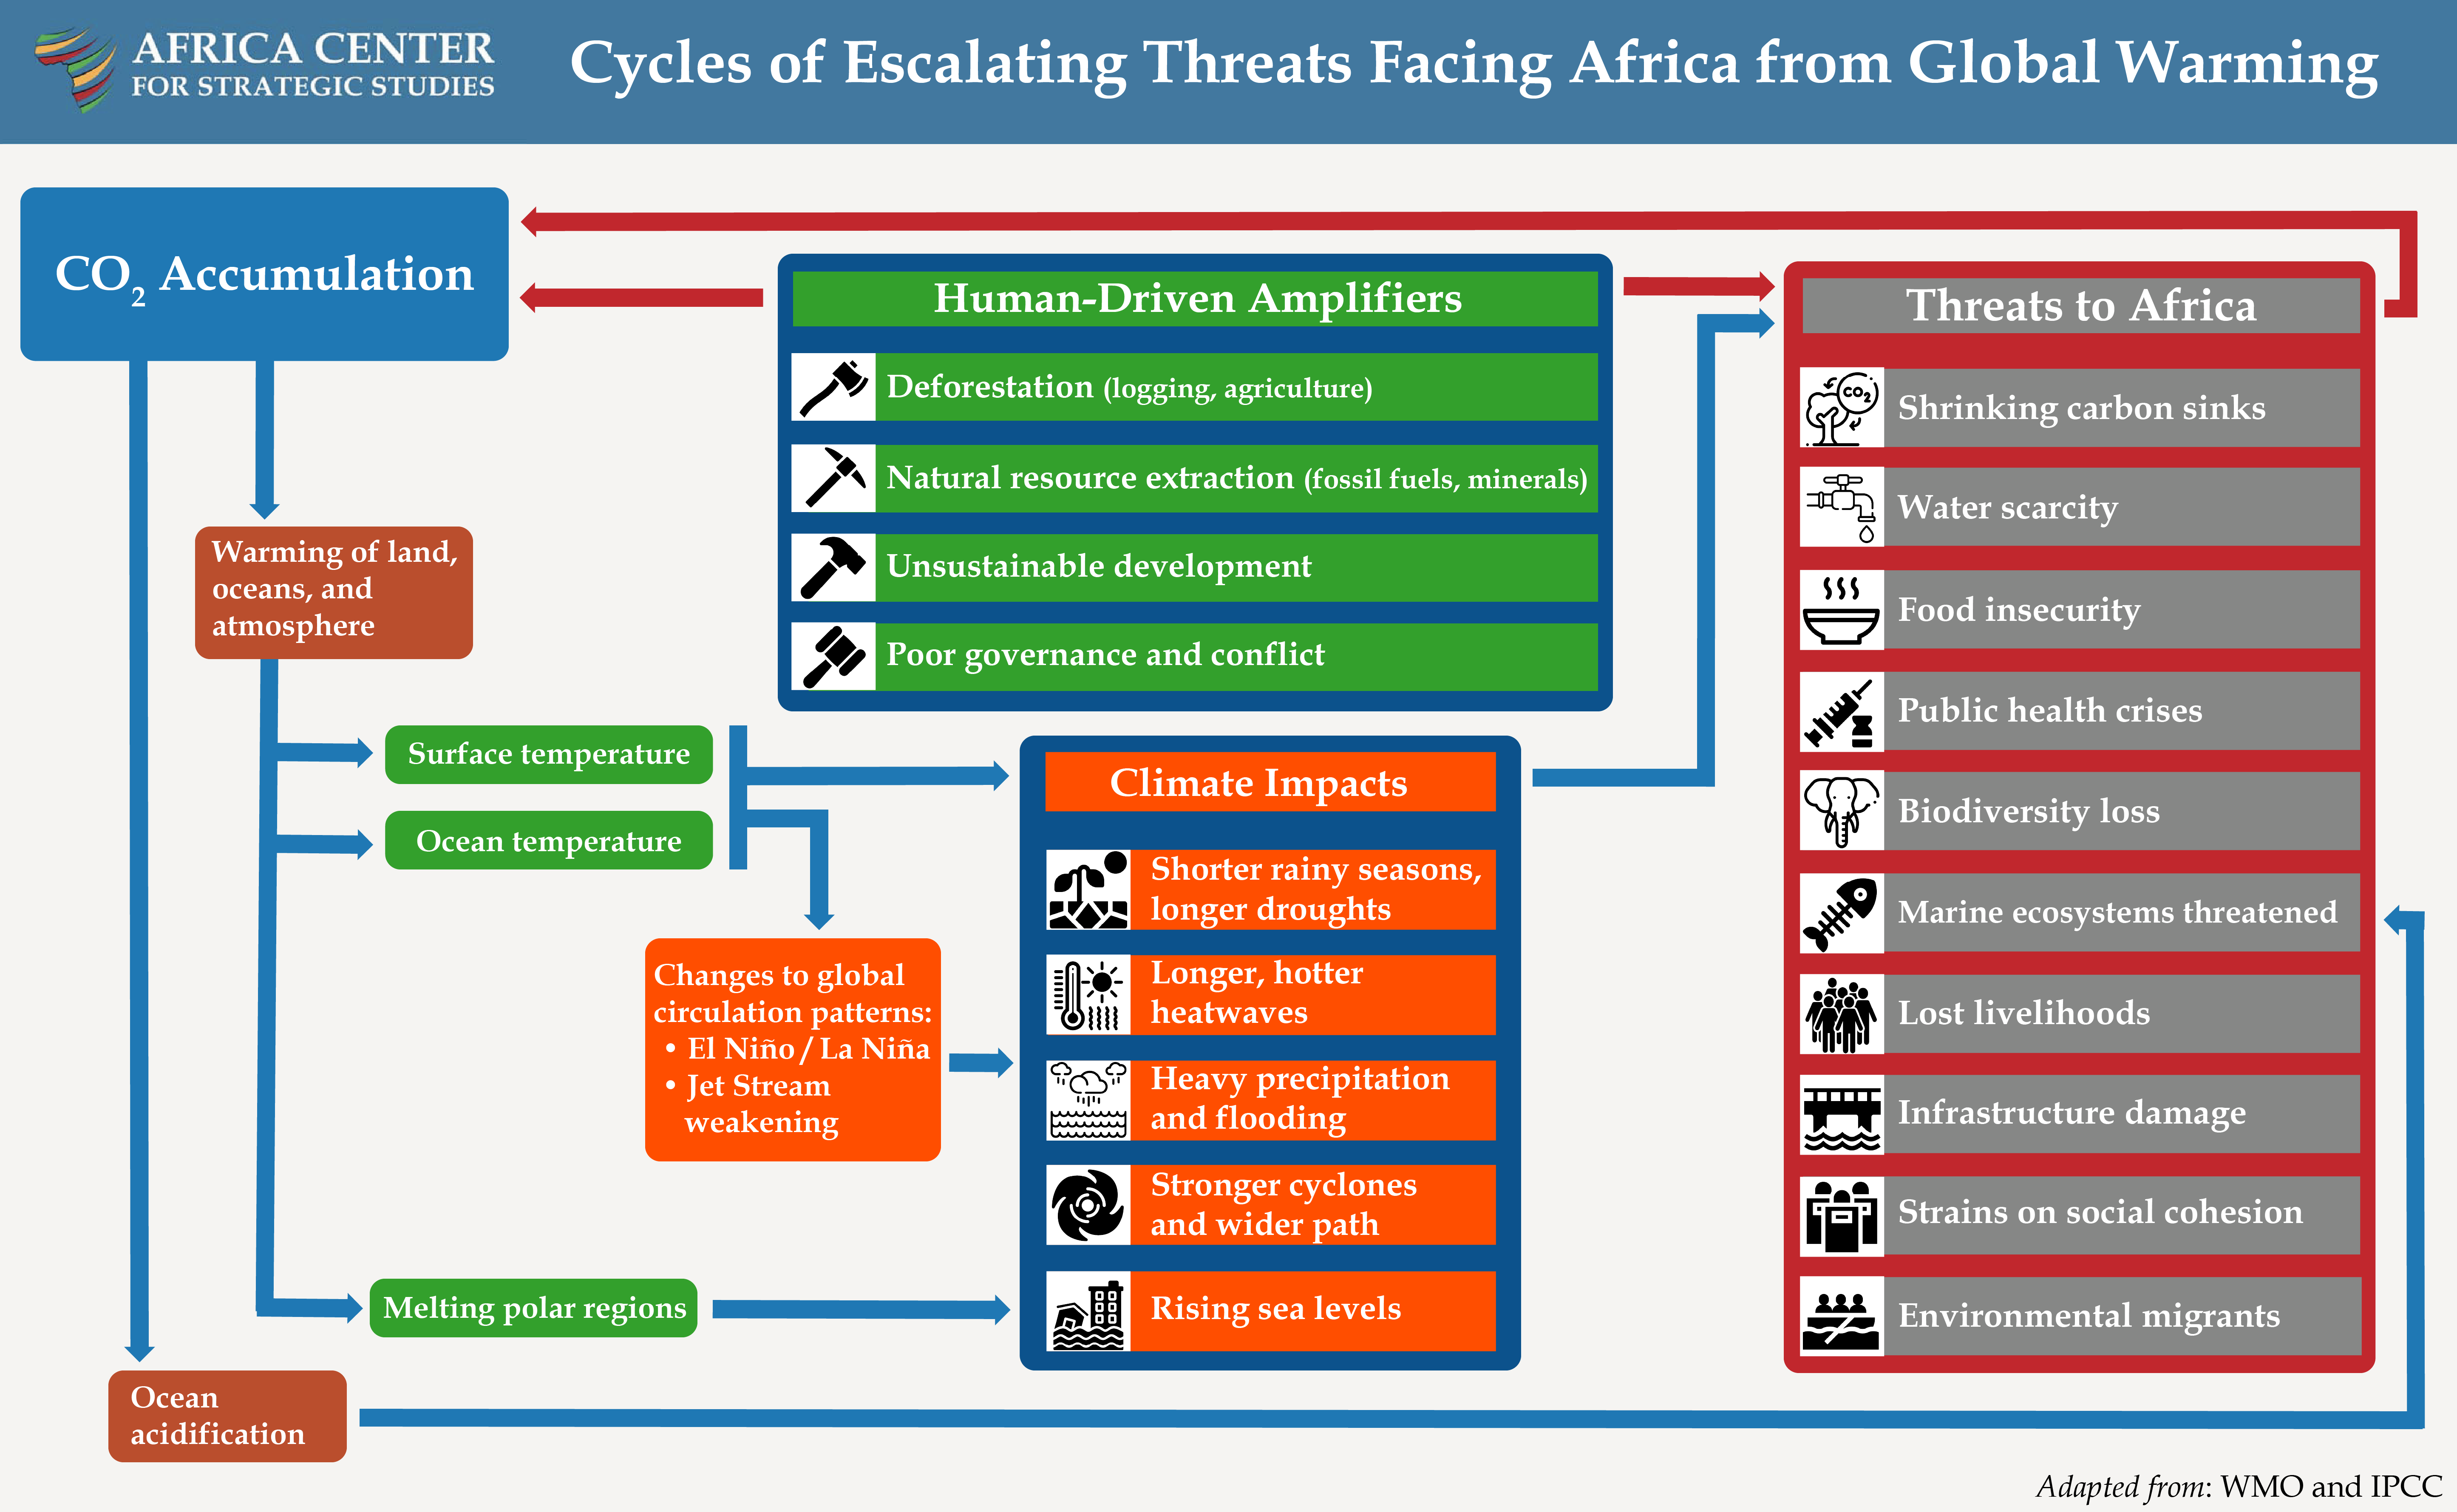 Cycles of Escalating Threats Facing Africa from Global Warming